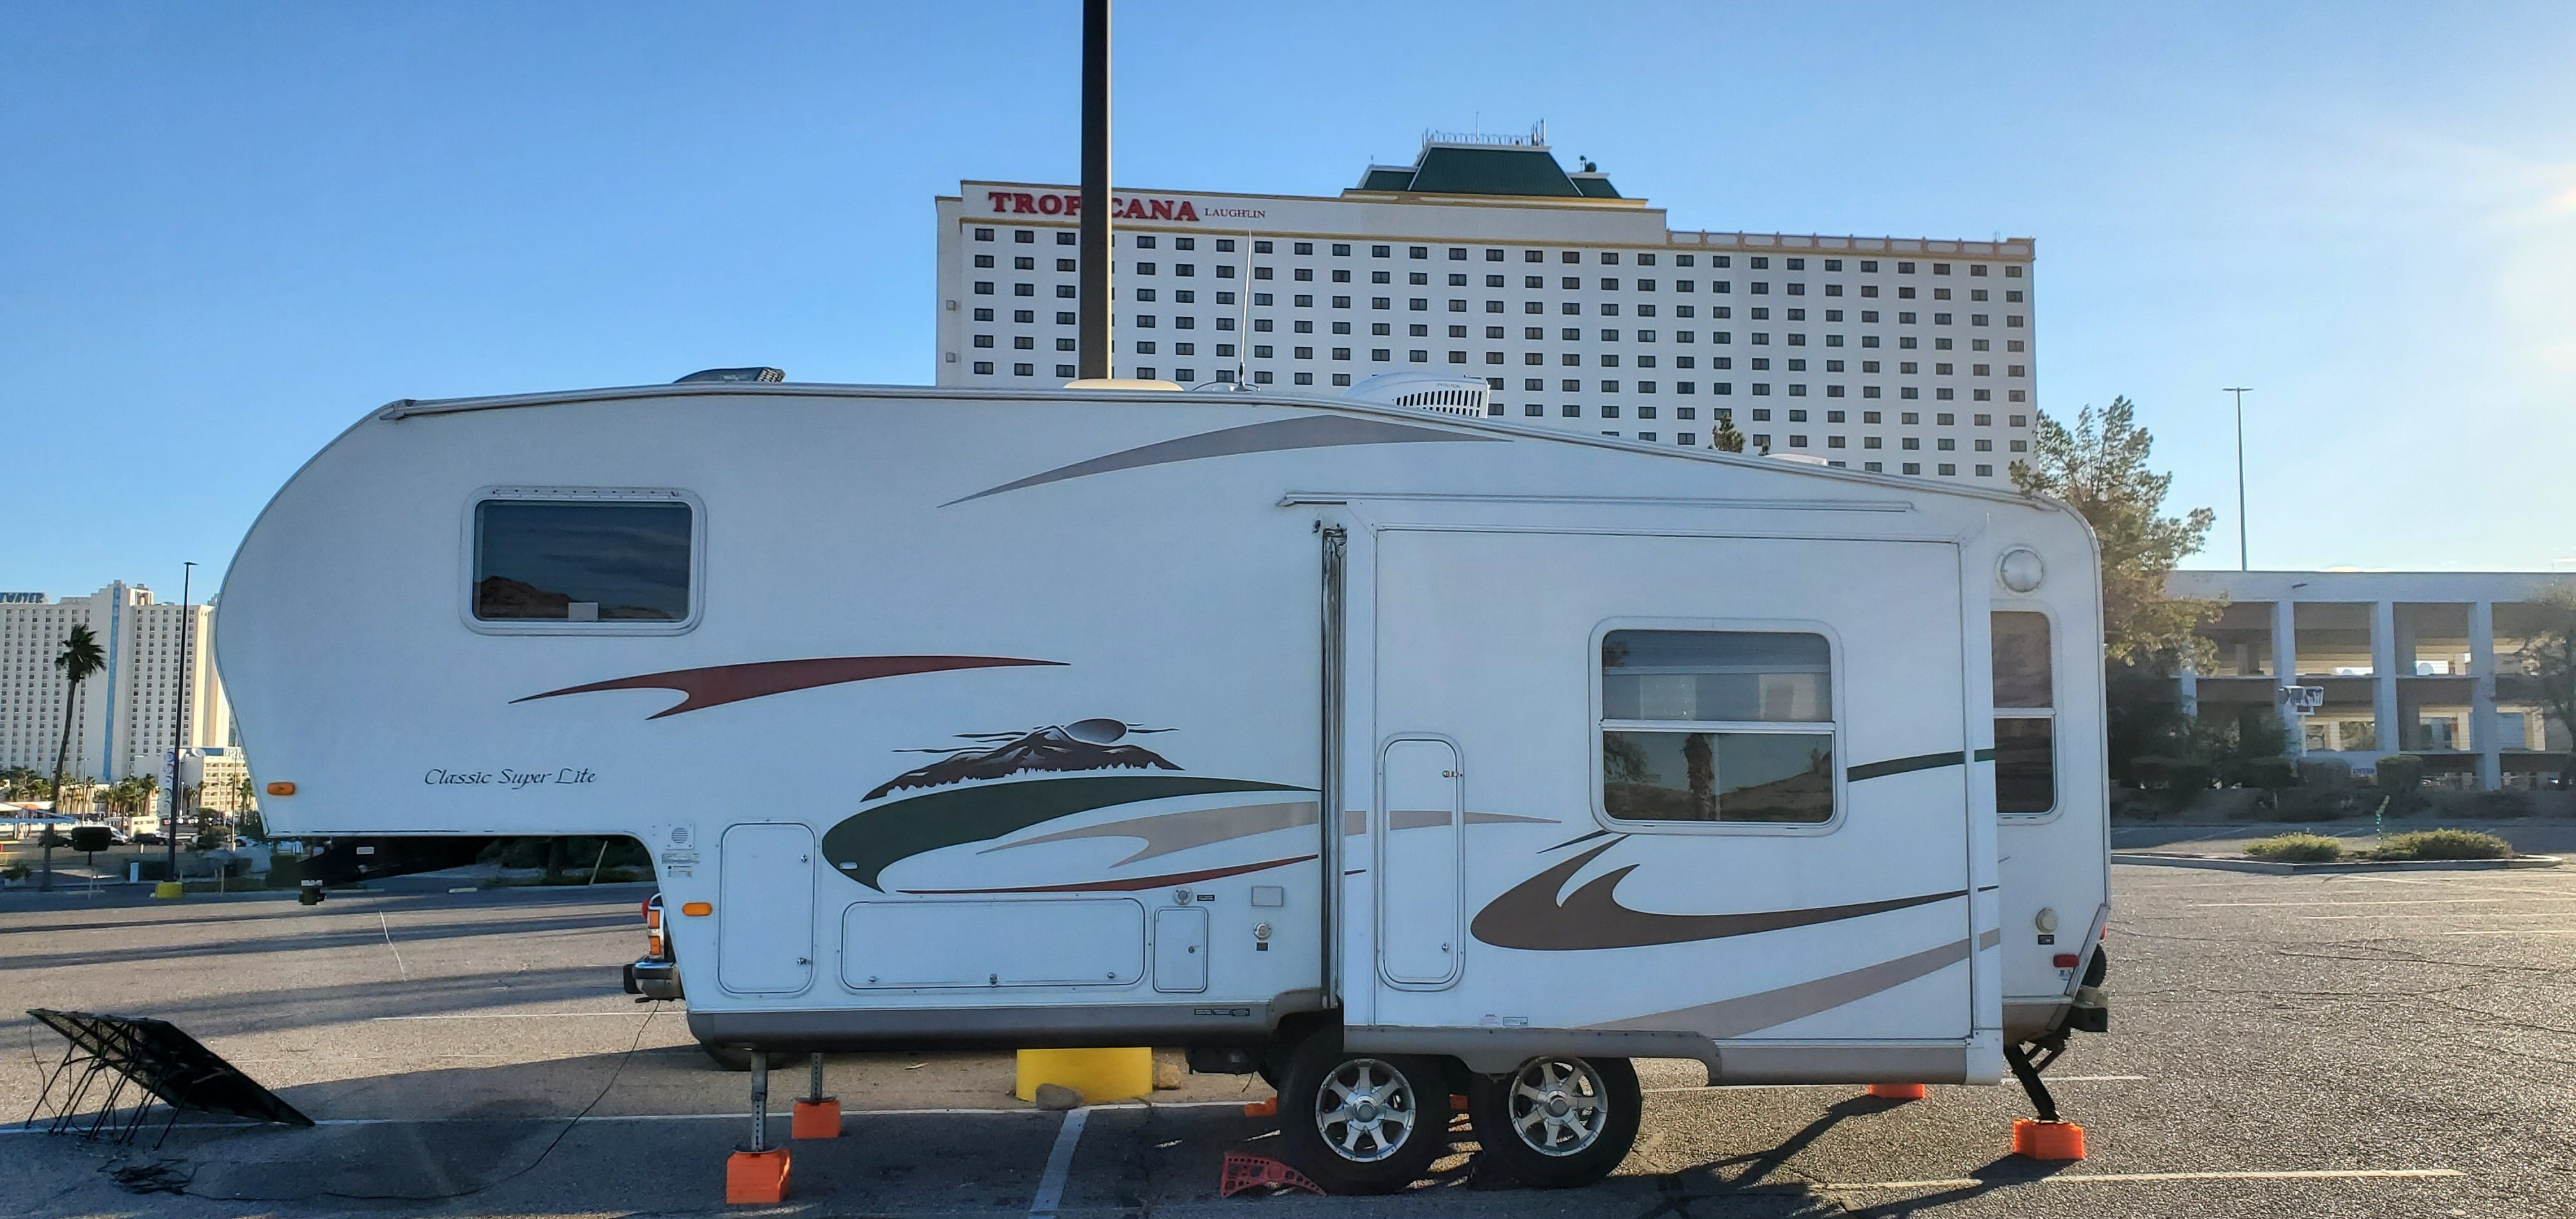 Camper submitted image from Tropicana Casino Laughlin  - 1